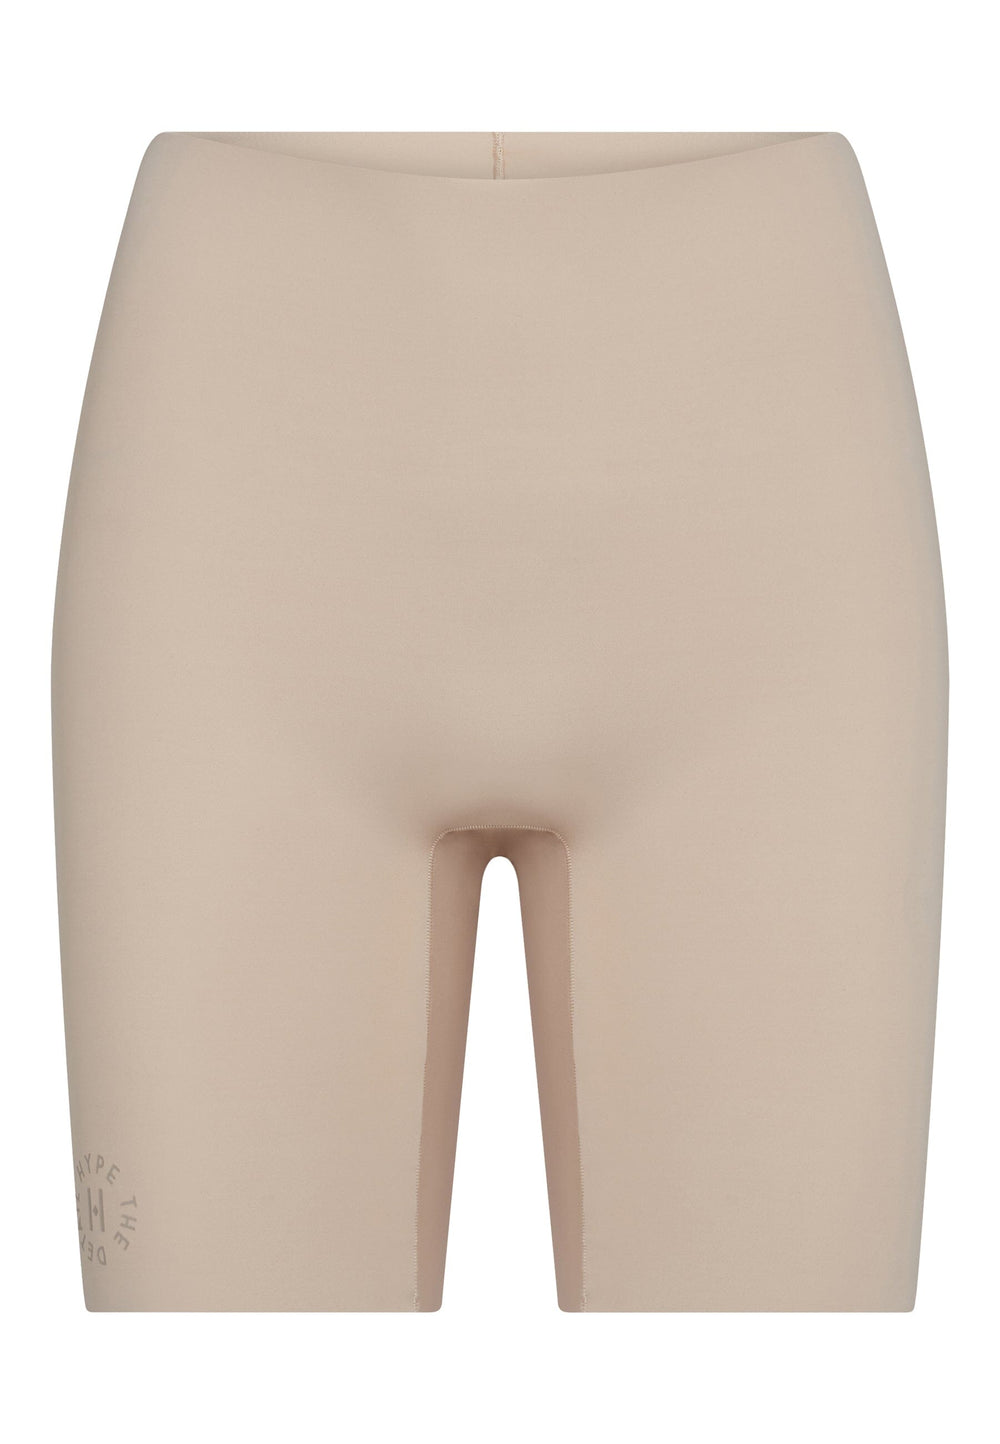 Hype The Detail - Shorts - 81 Sand Shorts 